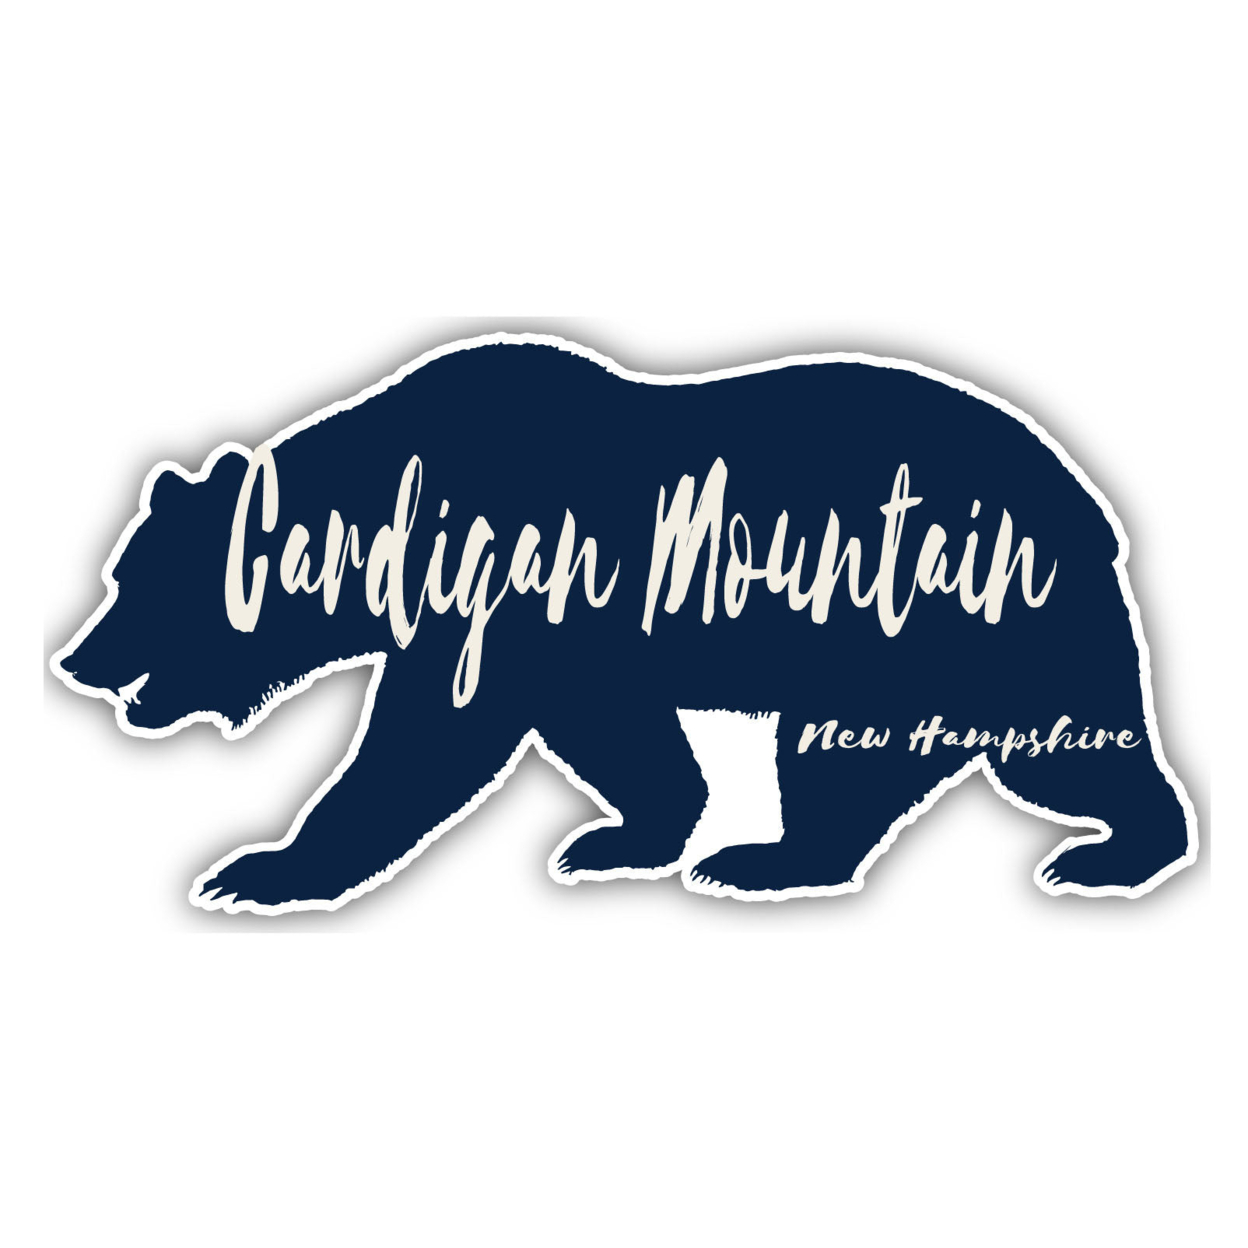 Cardigan Mountain New Hampshire Souvenir Decorative Stickers (Choose Theme And Size) - 4-Pack, 6-Inch, Bear